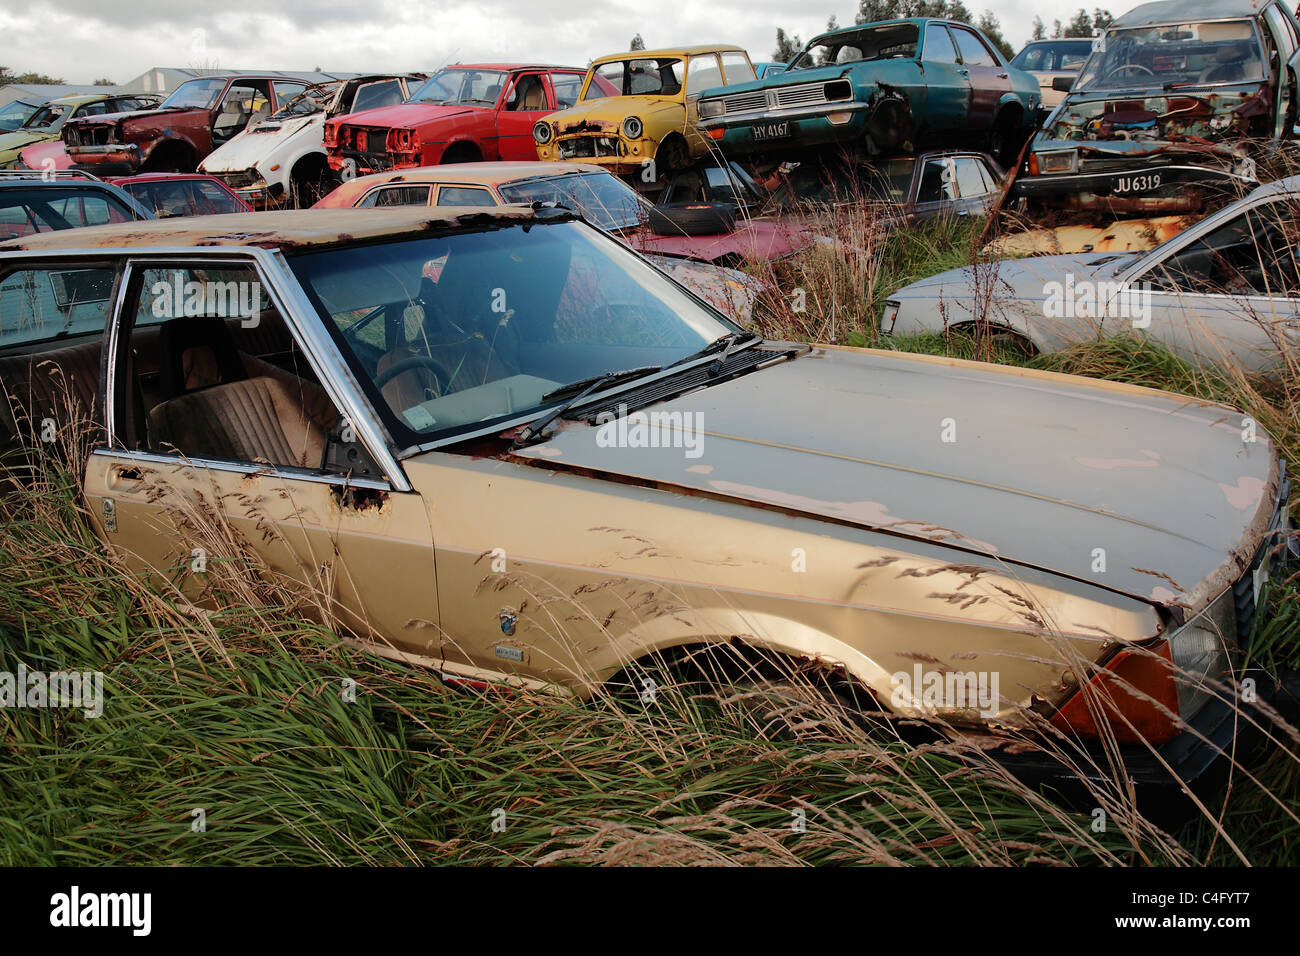 A rusty old car at a scrap yard in Invercargill, New Zealand Stock Photo